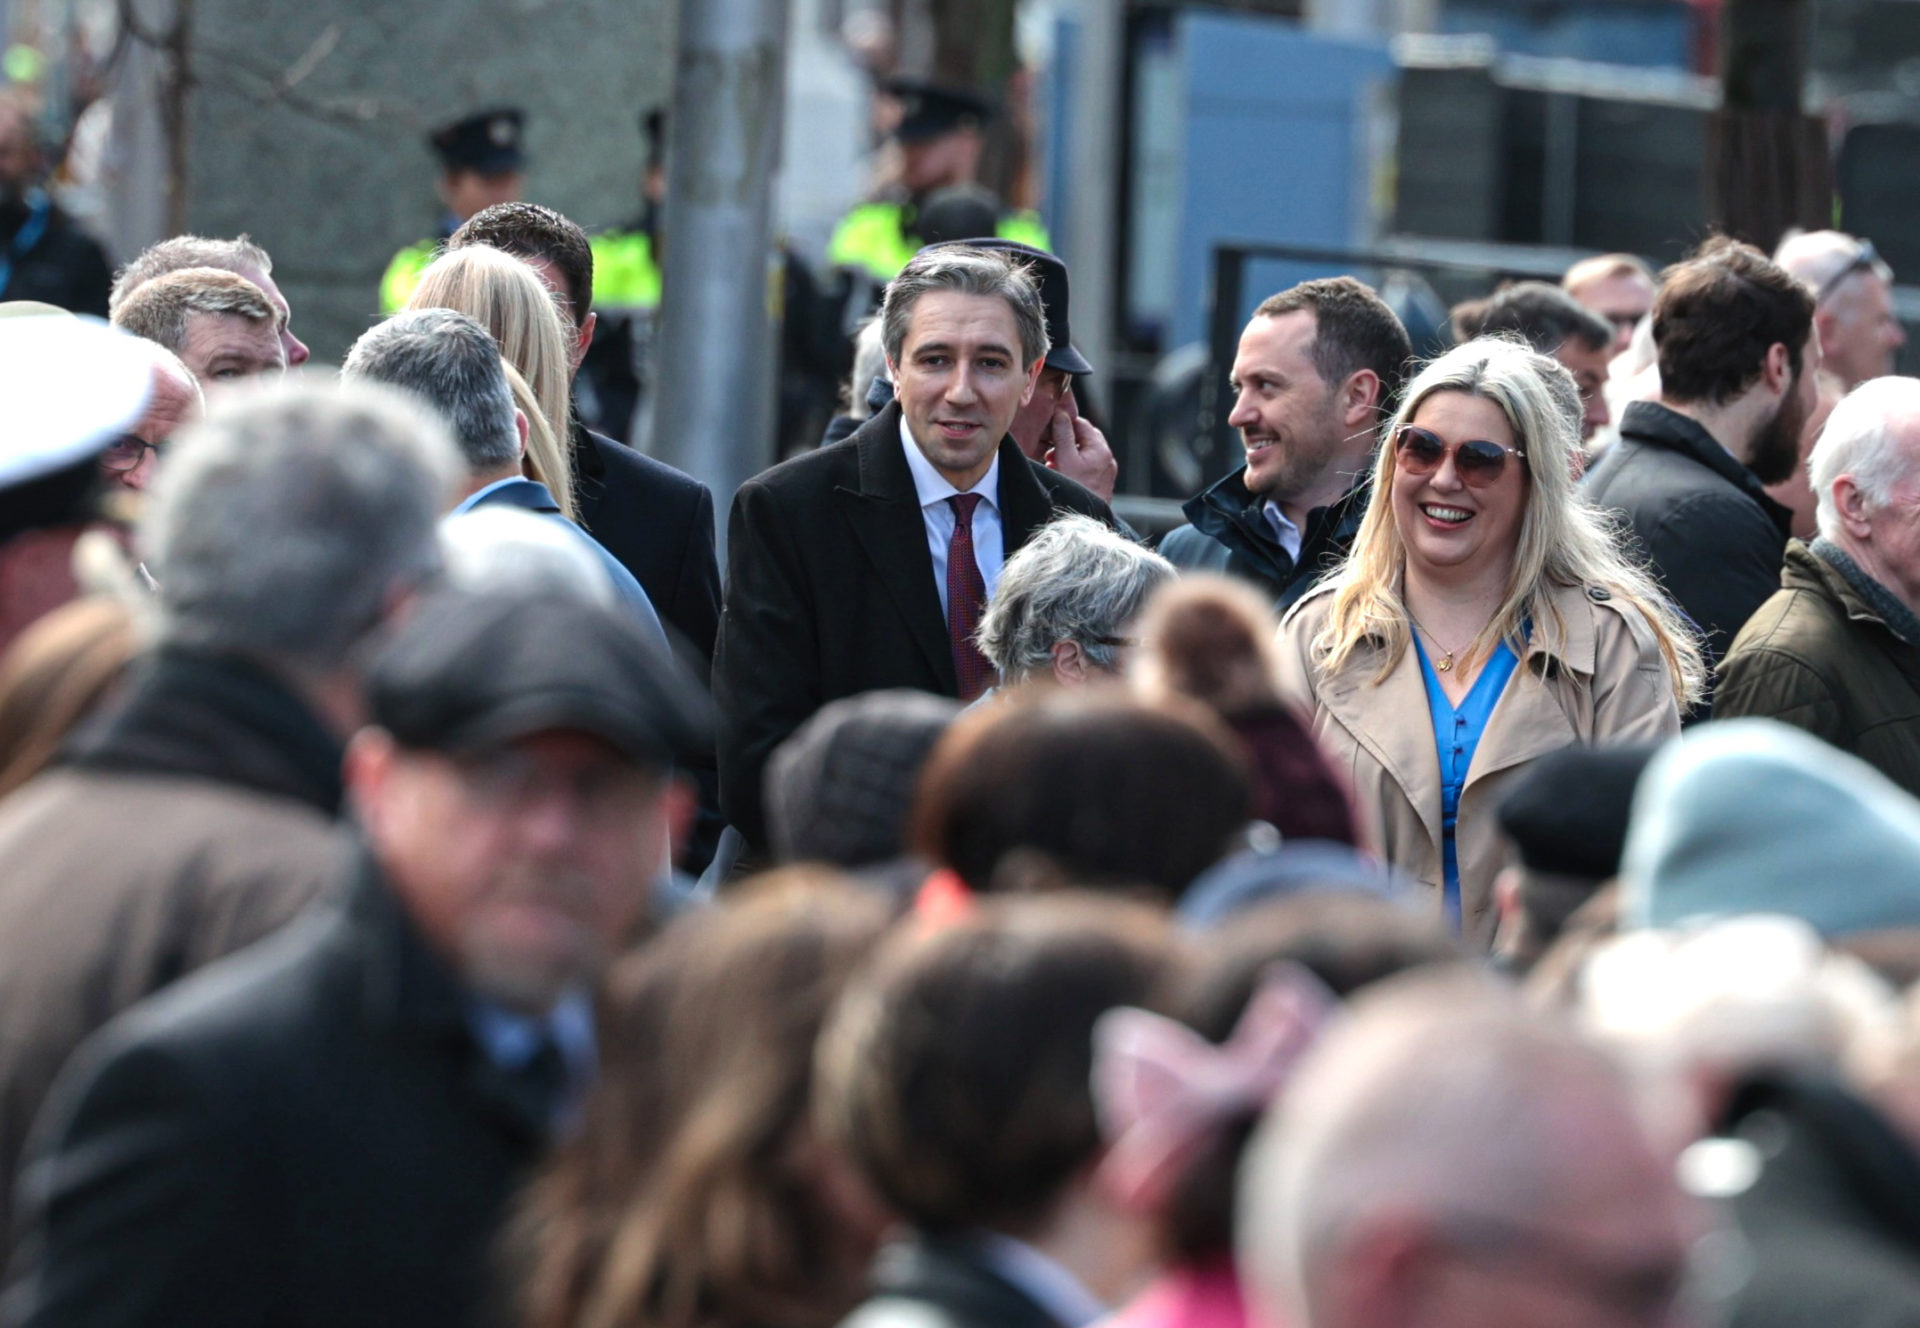 Fine Gael leader Simon Harris on O'Connell Street at the 108th anniversary of the 1916 Rising